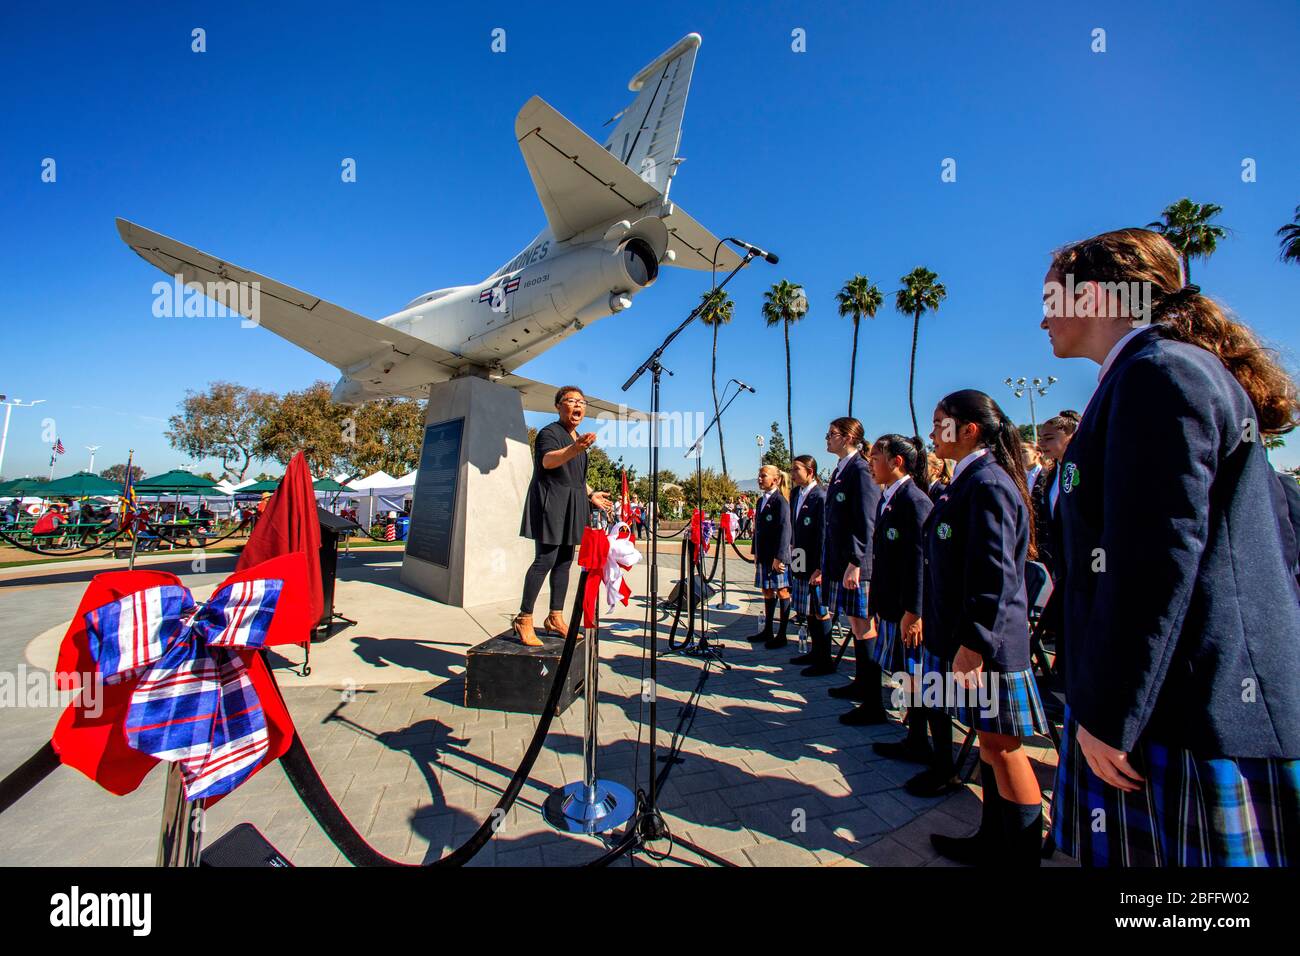 A Catholic school girls' choir is directed by their African American leader as they sing patriotic songs at Veterans Day observances in Costa Mesa, CA. The A4M Skyhawk aircraft is a patriotic monument. Stock Photo